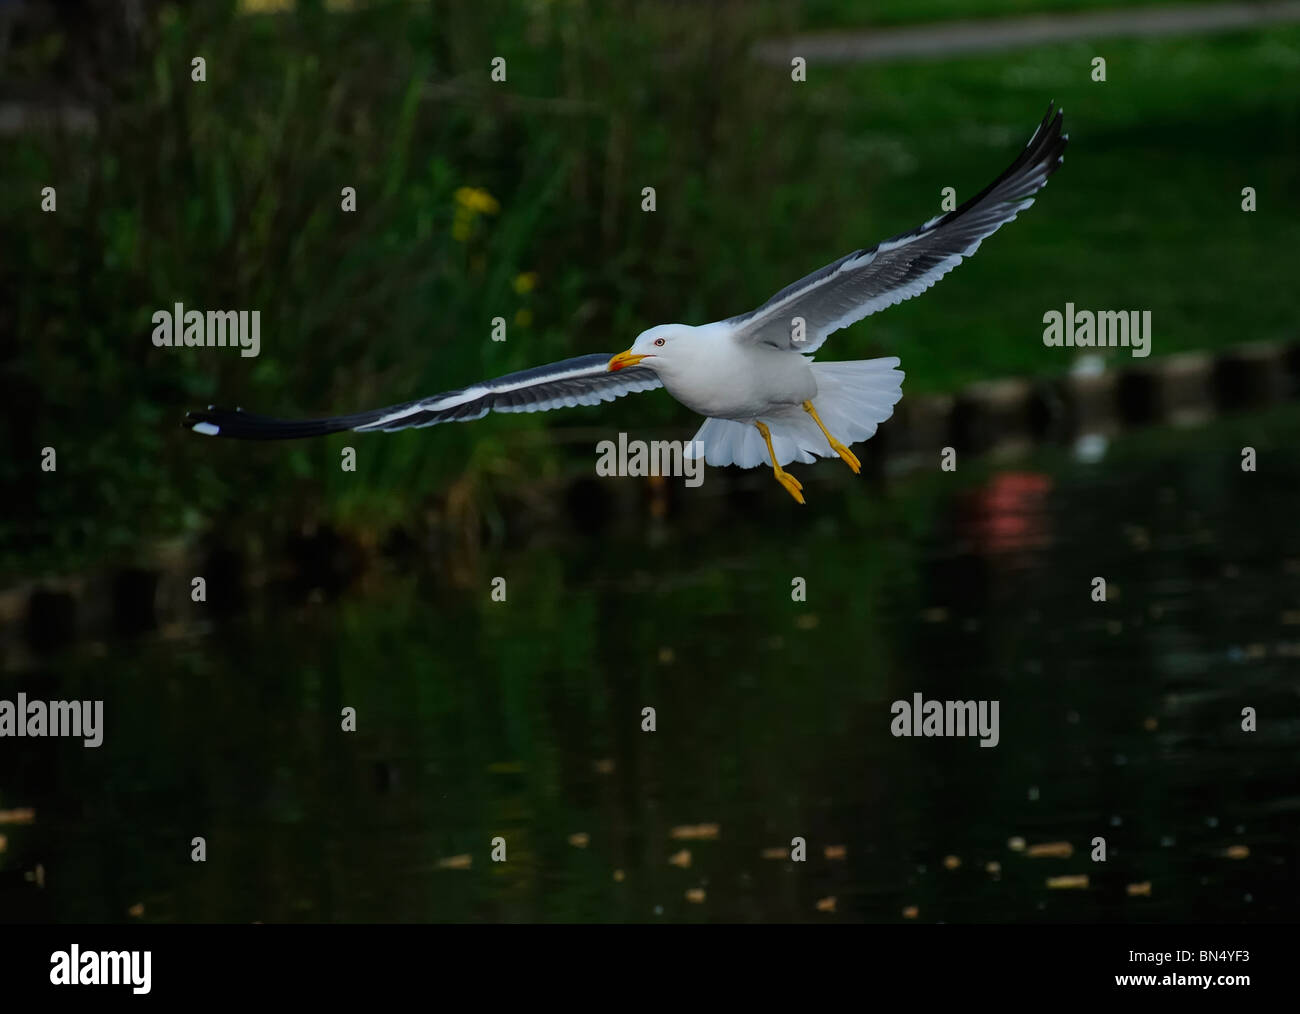 Adult Lesser Black-backed gull (Larus fuscus) soaring on suface of a lake with waterweeds Stock Photo